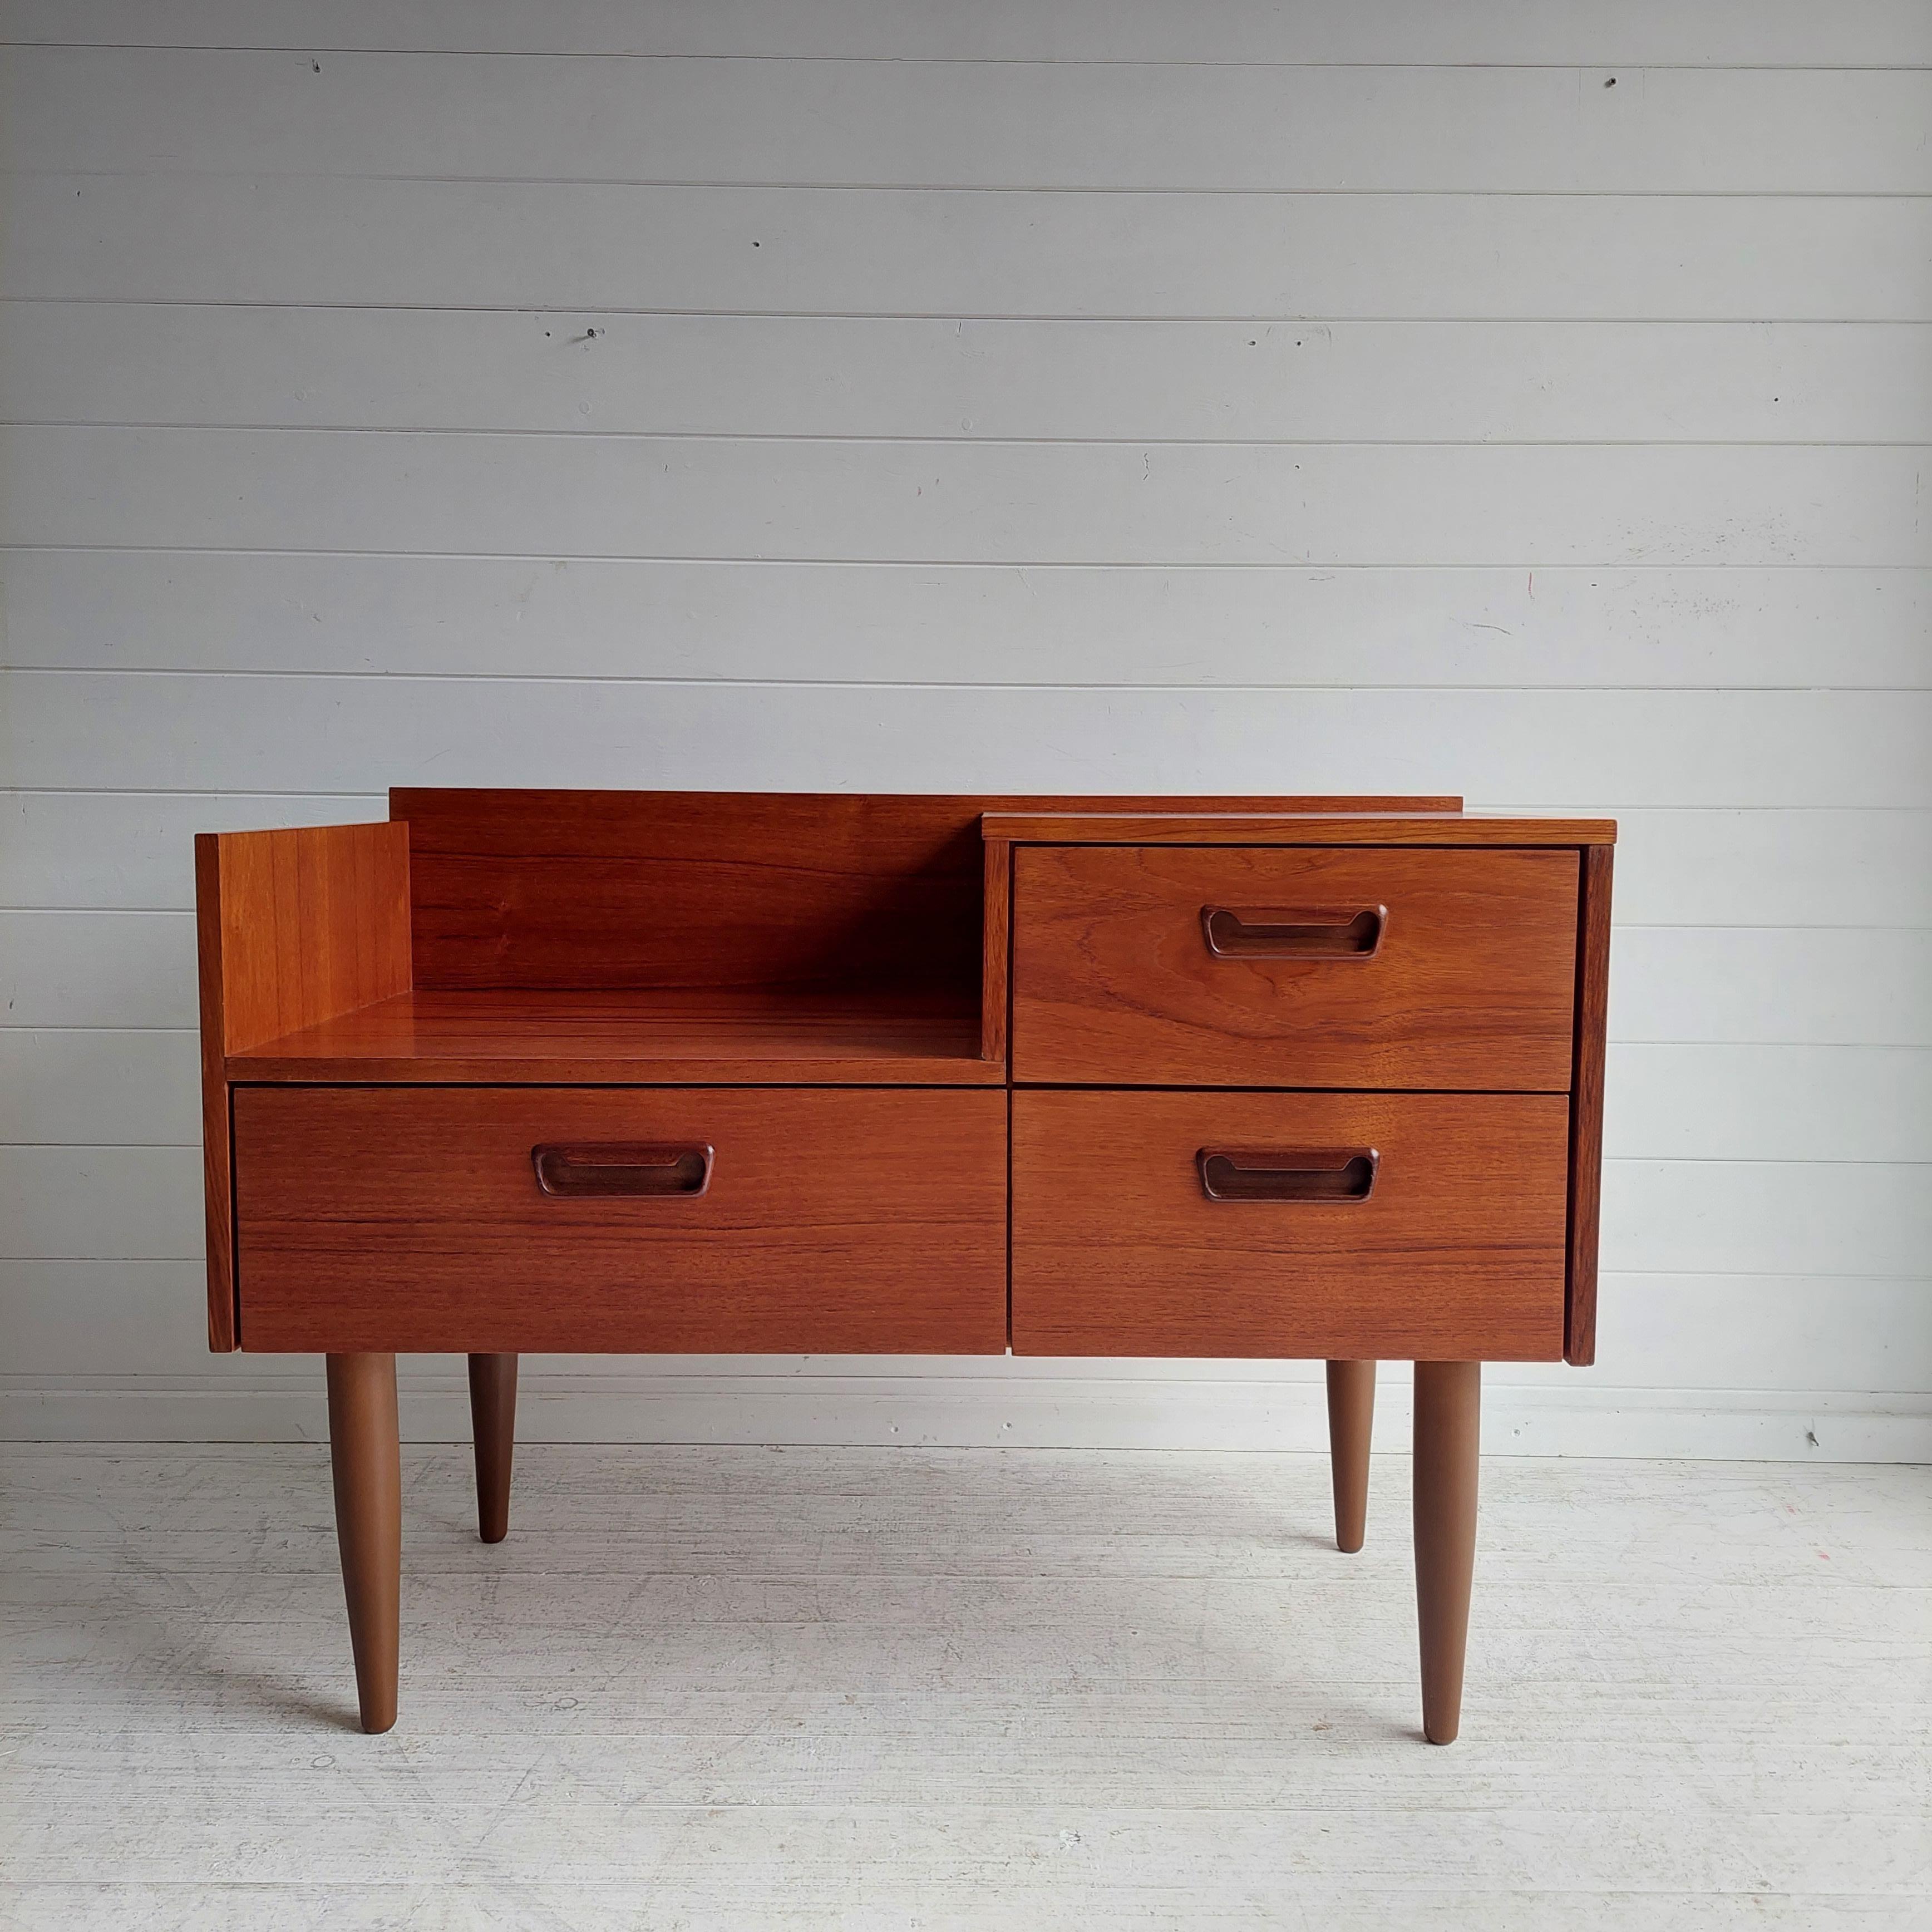 This Danish teak storage piece is clearly a prize, for more reasons than one.

We think this mid century beauty is by Munch Slagelse Mobler.
From the late sixties, early seventies. 
Nice sleek design. 
The maker can be deduced from the shape of the